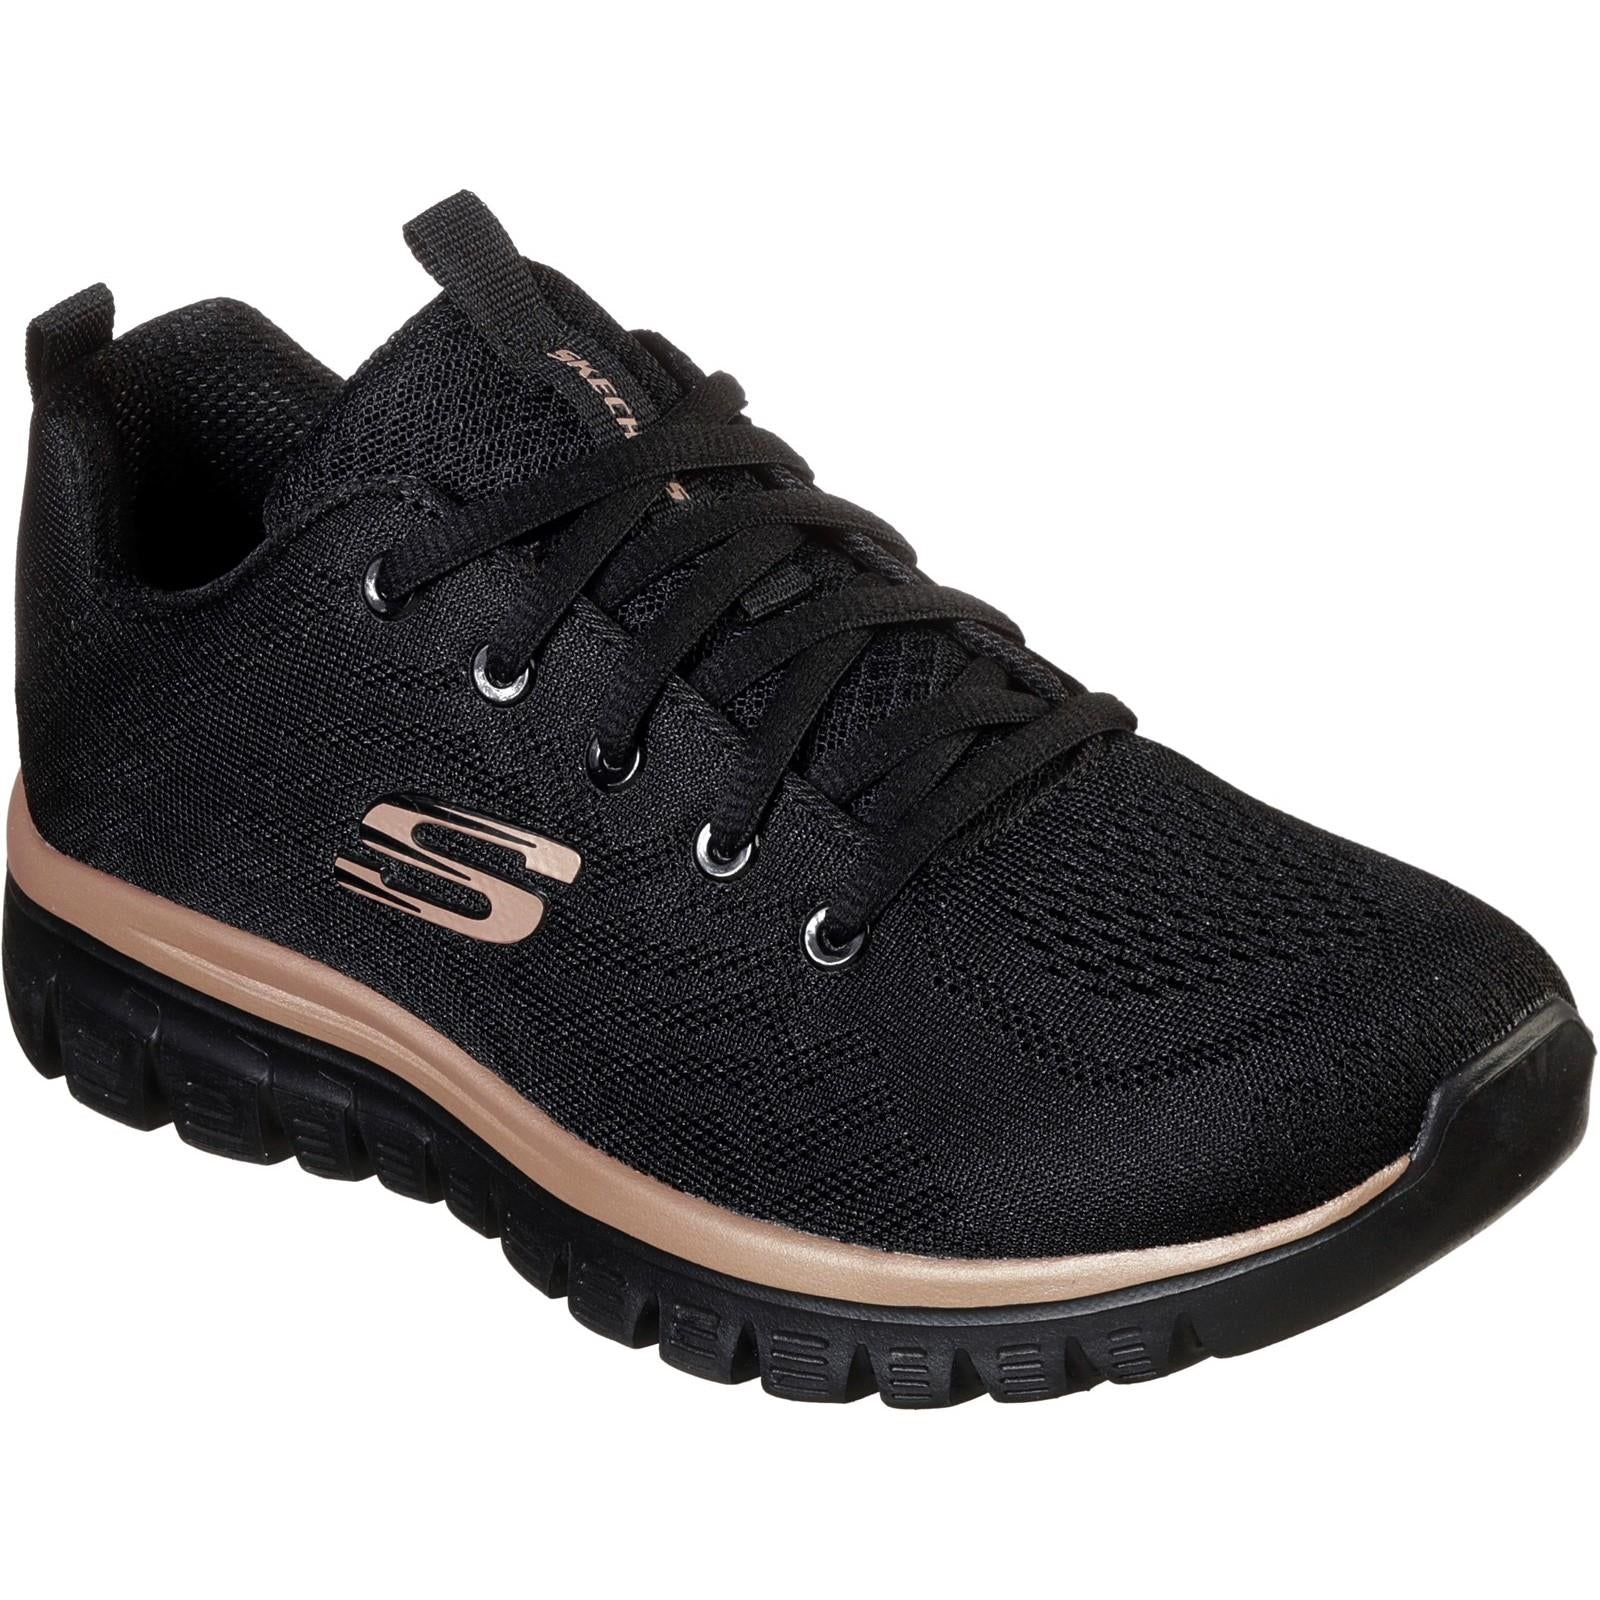 Skechers Graceful Get Connected black/gold ladies memory foam trainers shoes